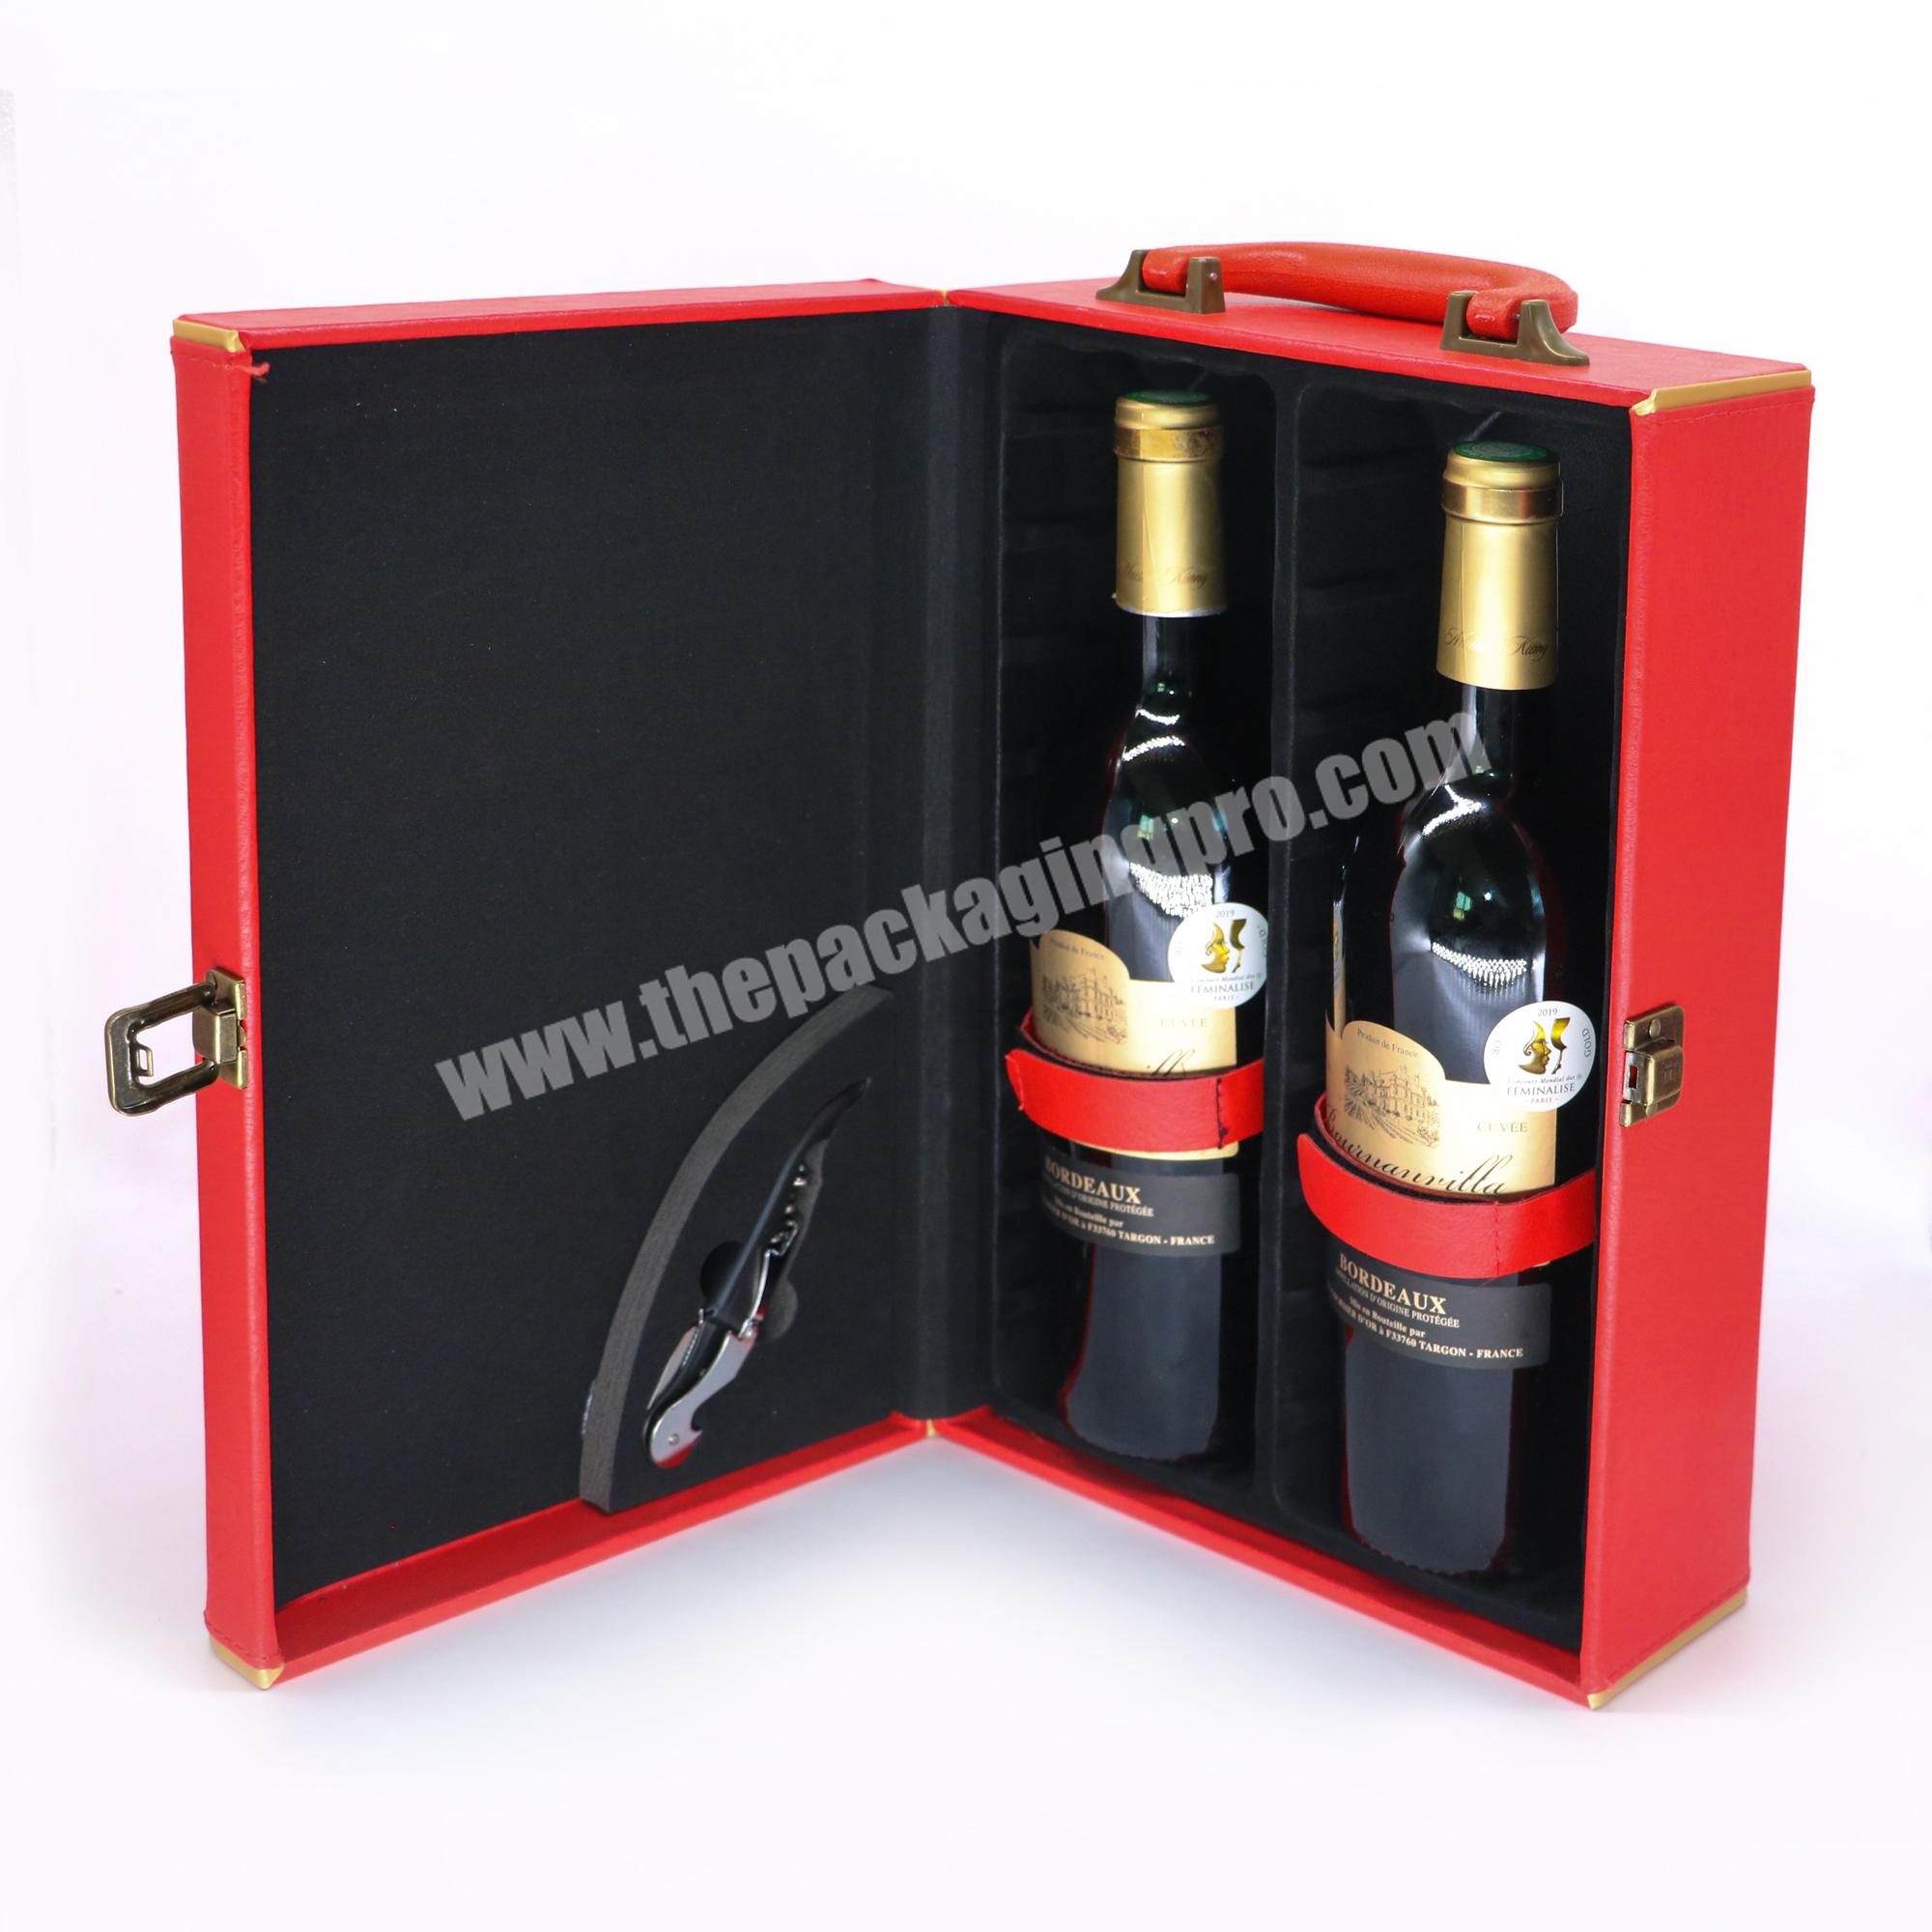 New wine gift boxes wholesale red wine packaging boxes wine paper box for sale